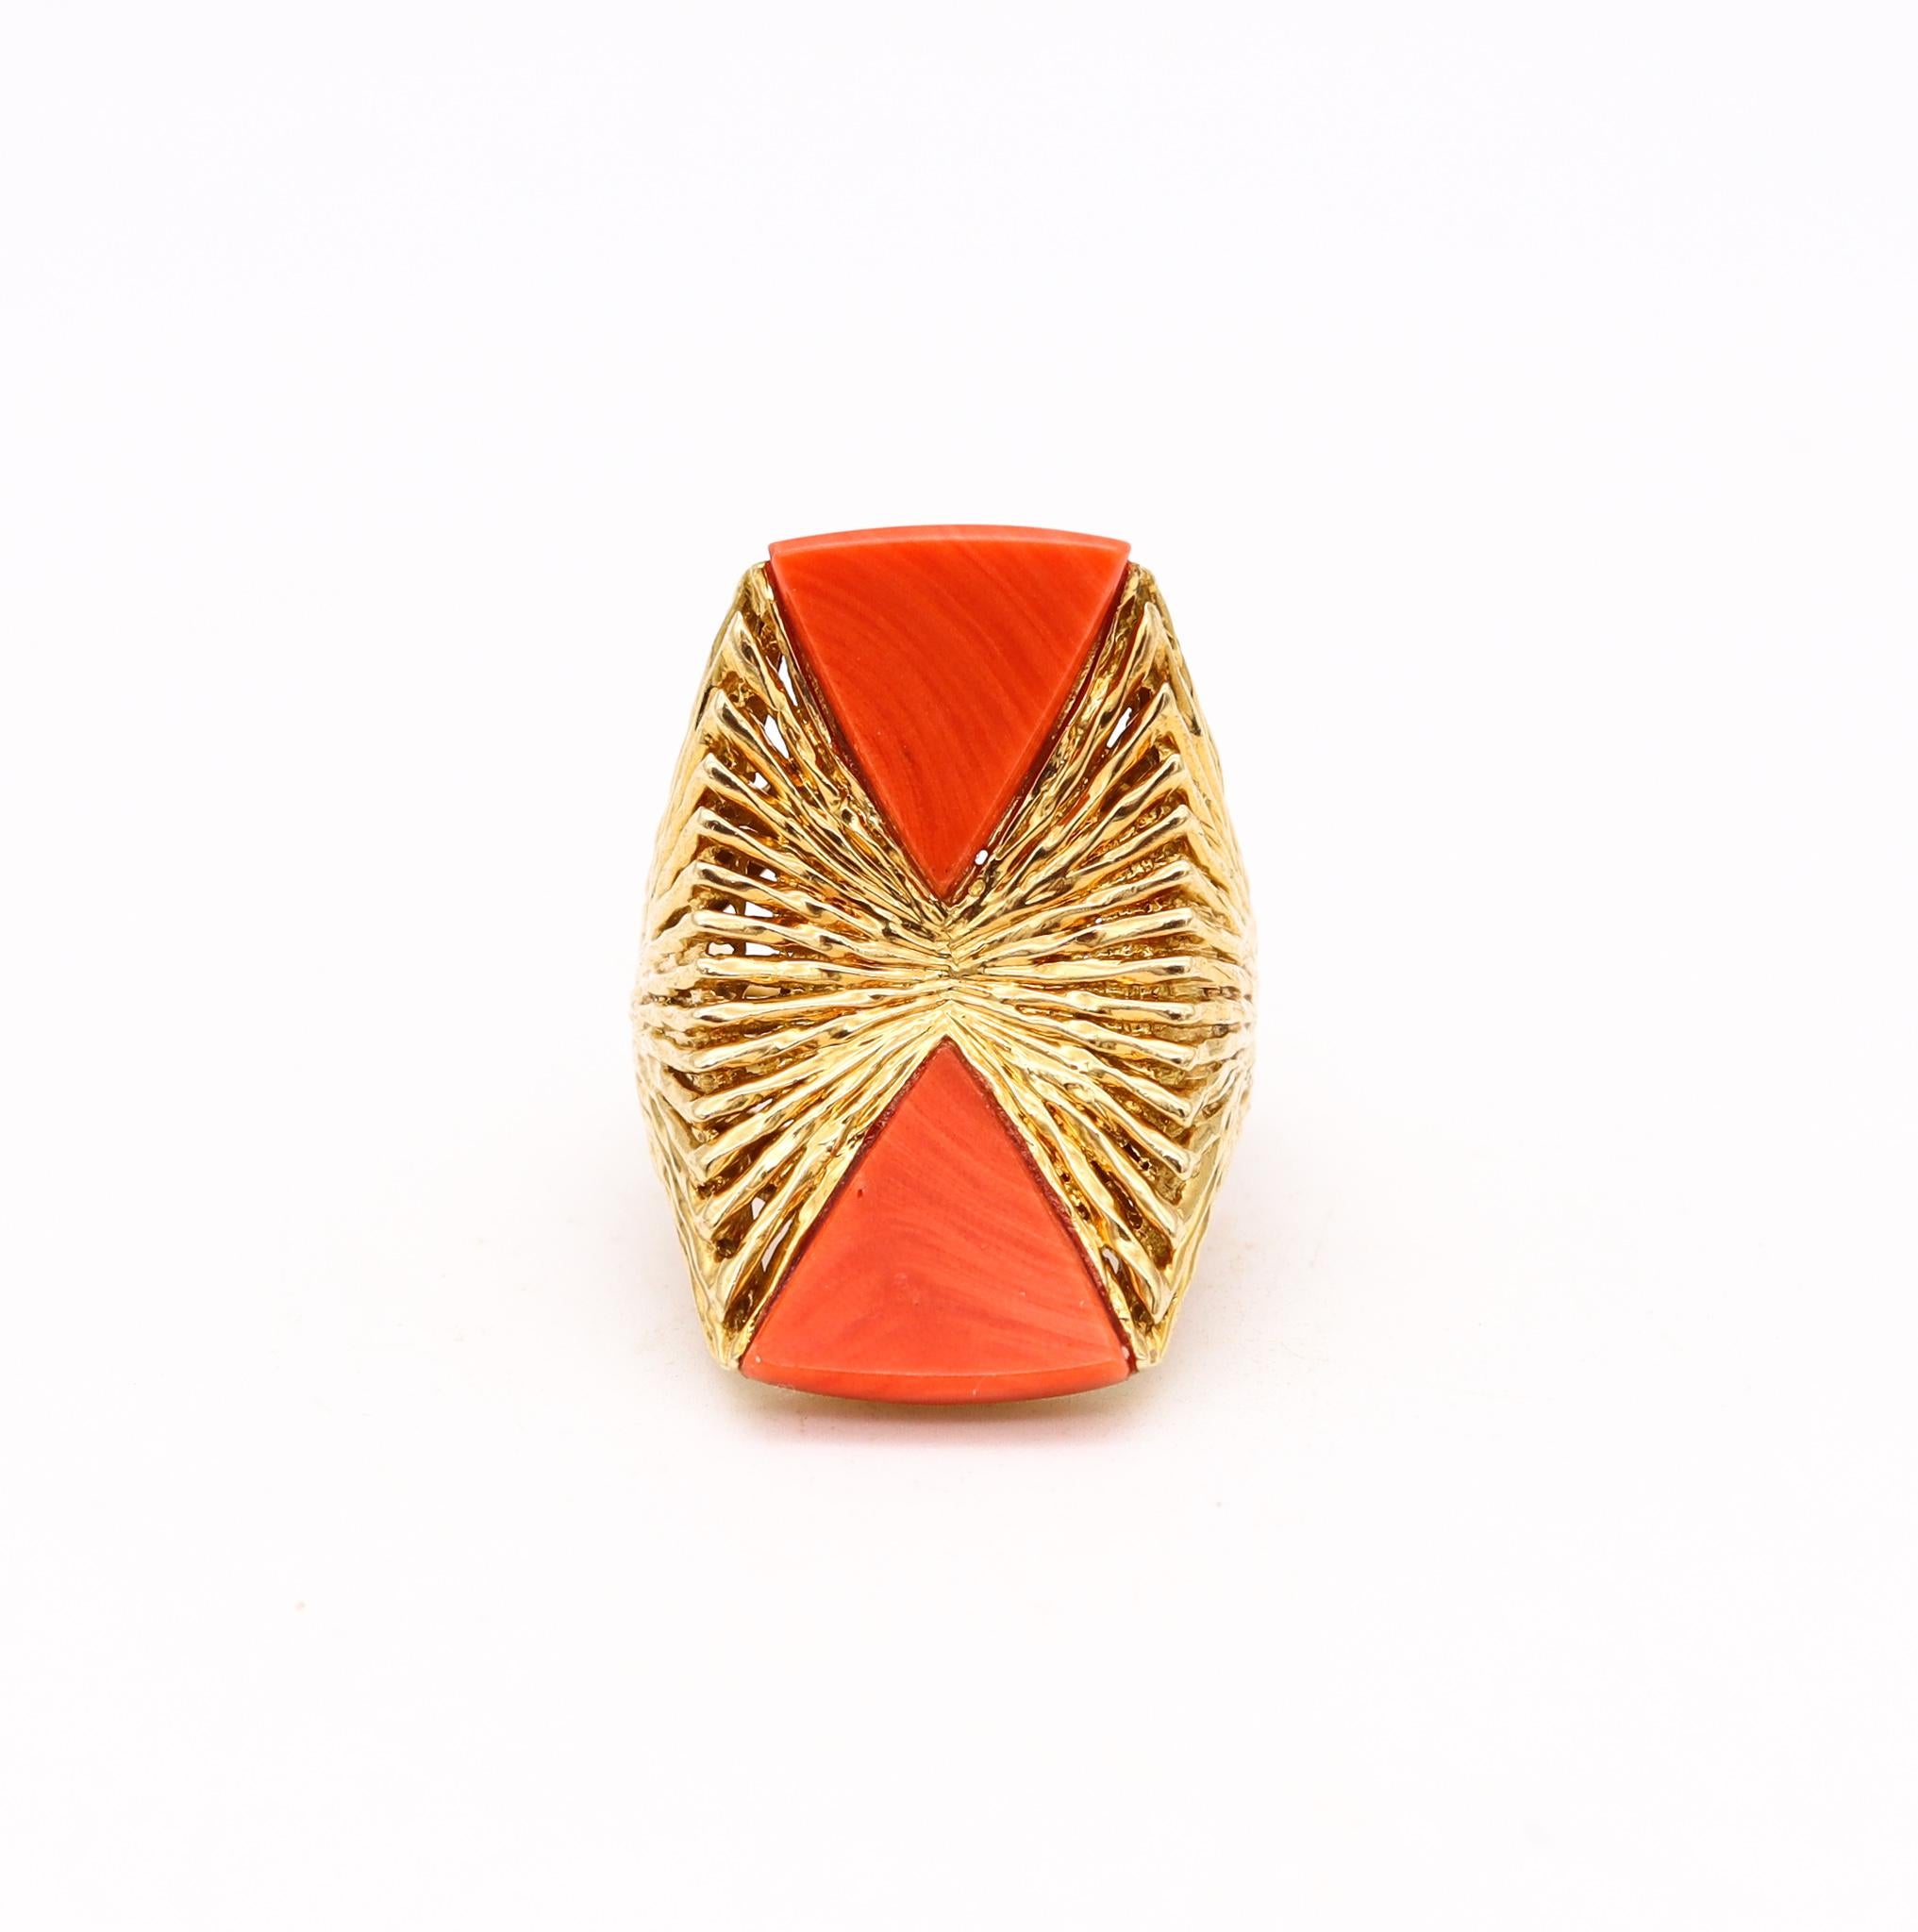 Women's Kutchinsky London 1973 Geometric Cocktail Ring Textured 18Kt with Coral Carvings